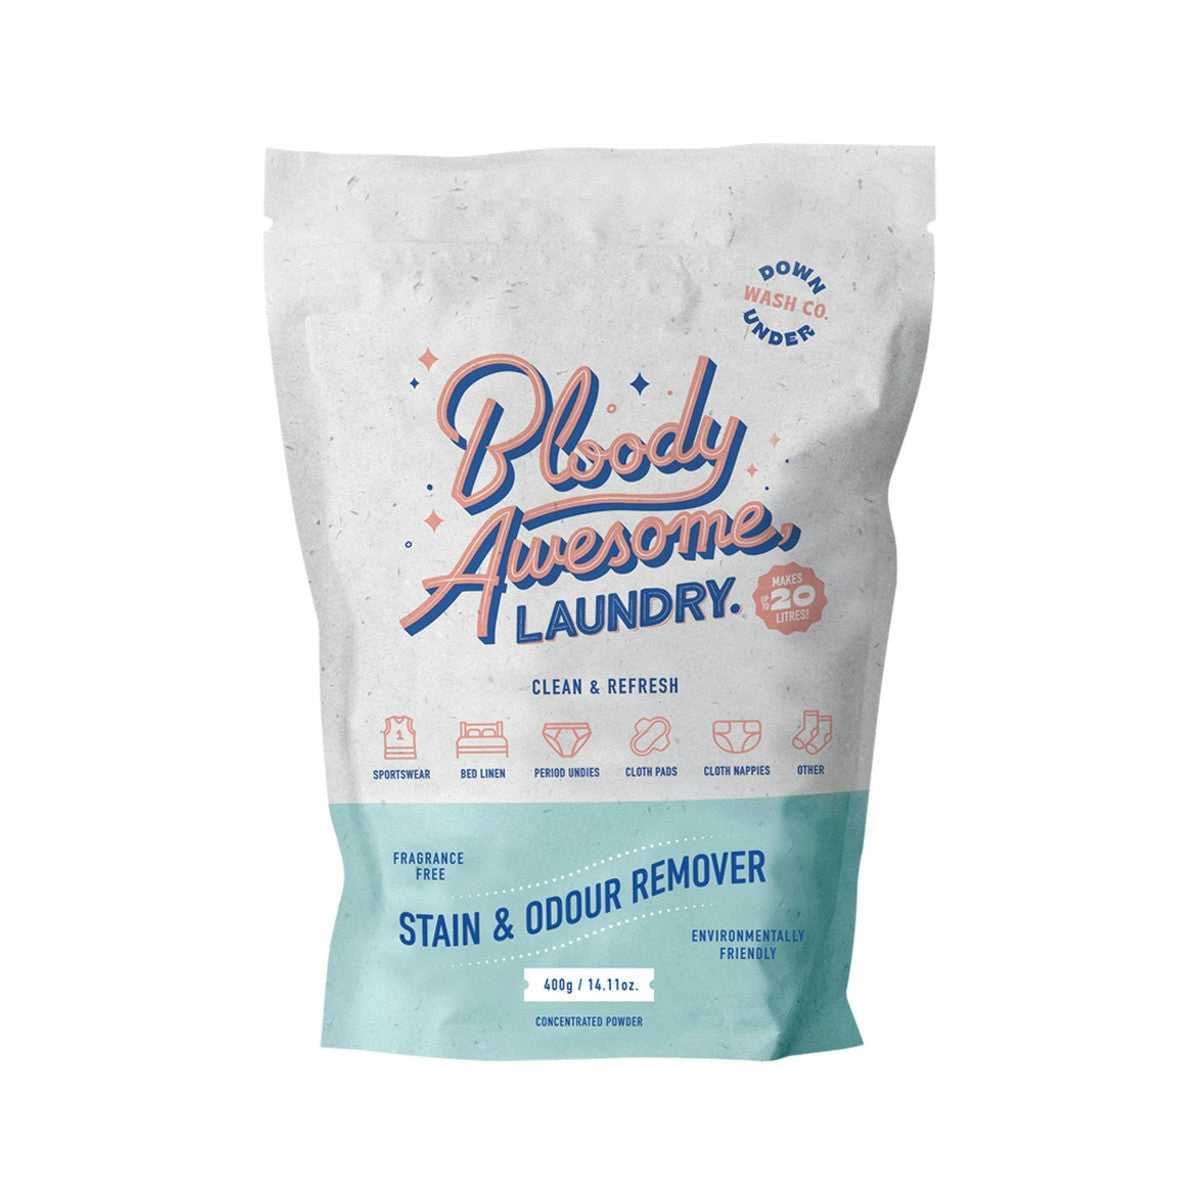 image of Downunder Wash Co. (Bloody Awesome, Laundry) Stain & Odour Remover Powder Fragrance Free 400g on white background